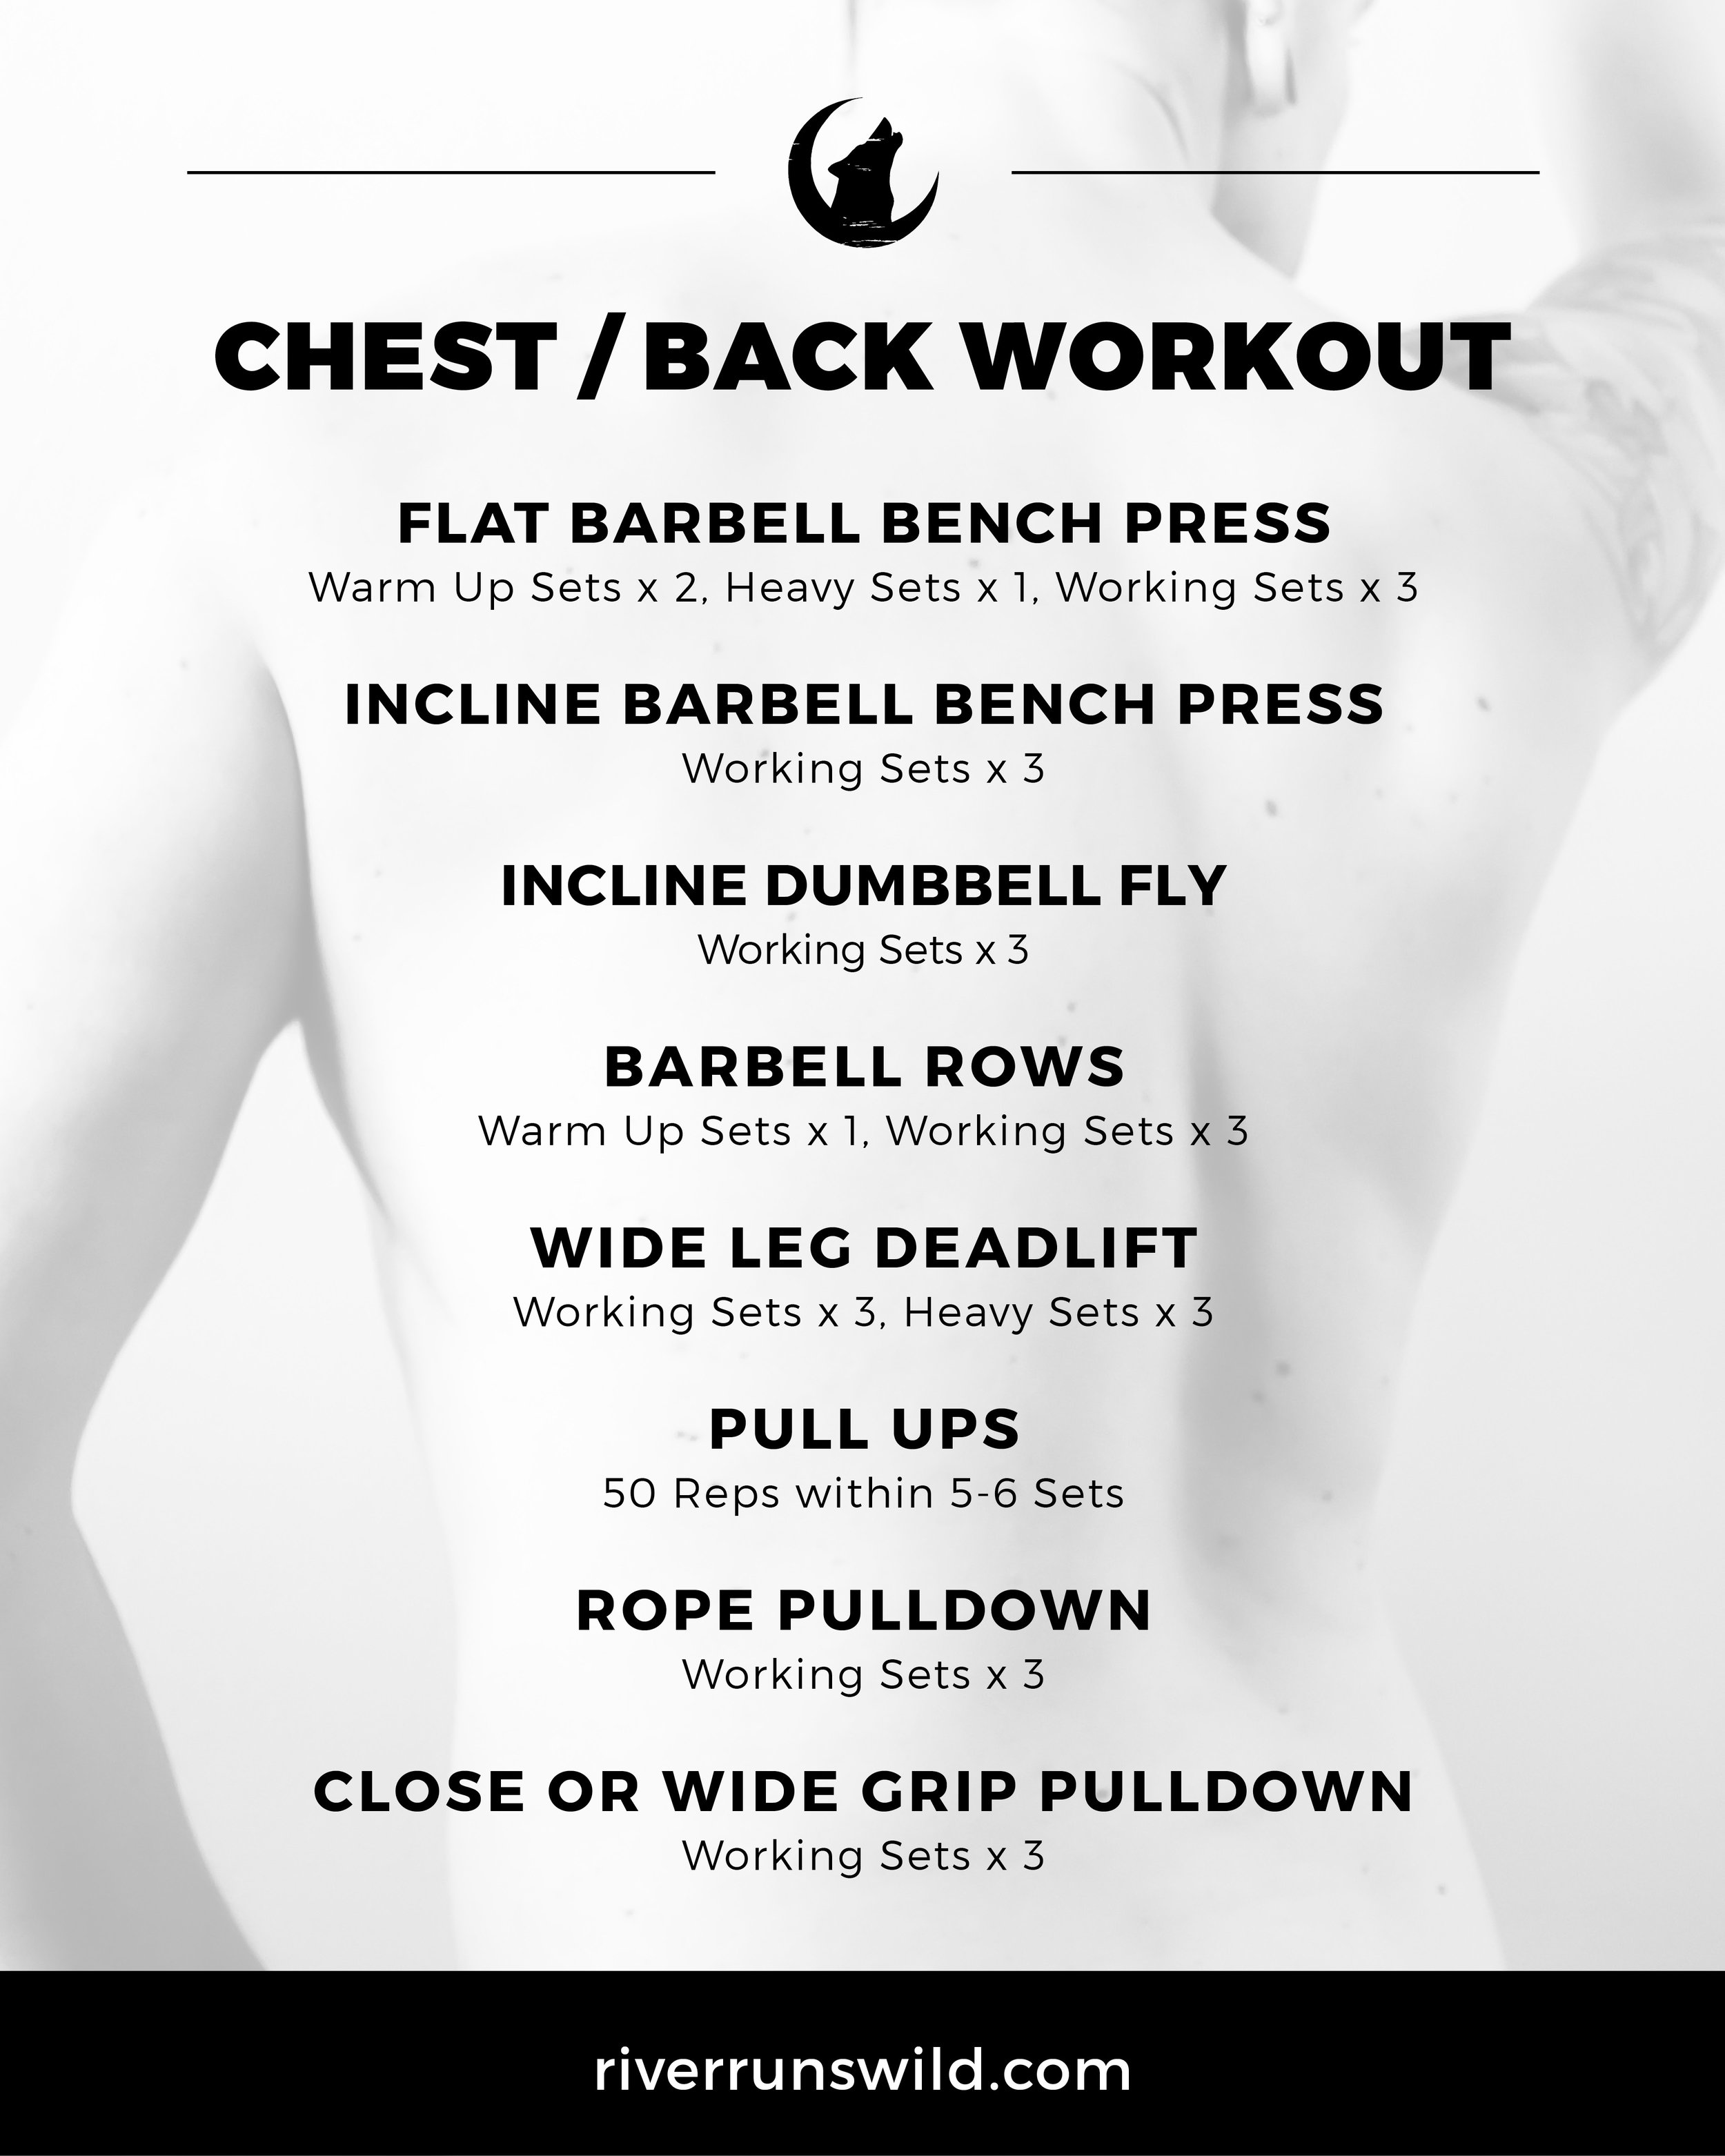 Chest / Back Workout to Get Bigger - FTM Fitness — River Runs Wild - FTM  Fitness, Transition, Nutrition, Wellness